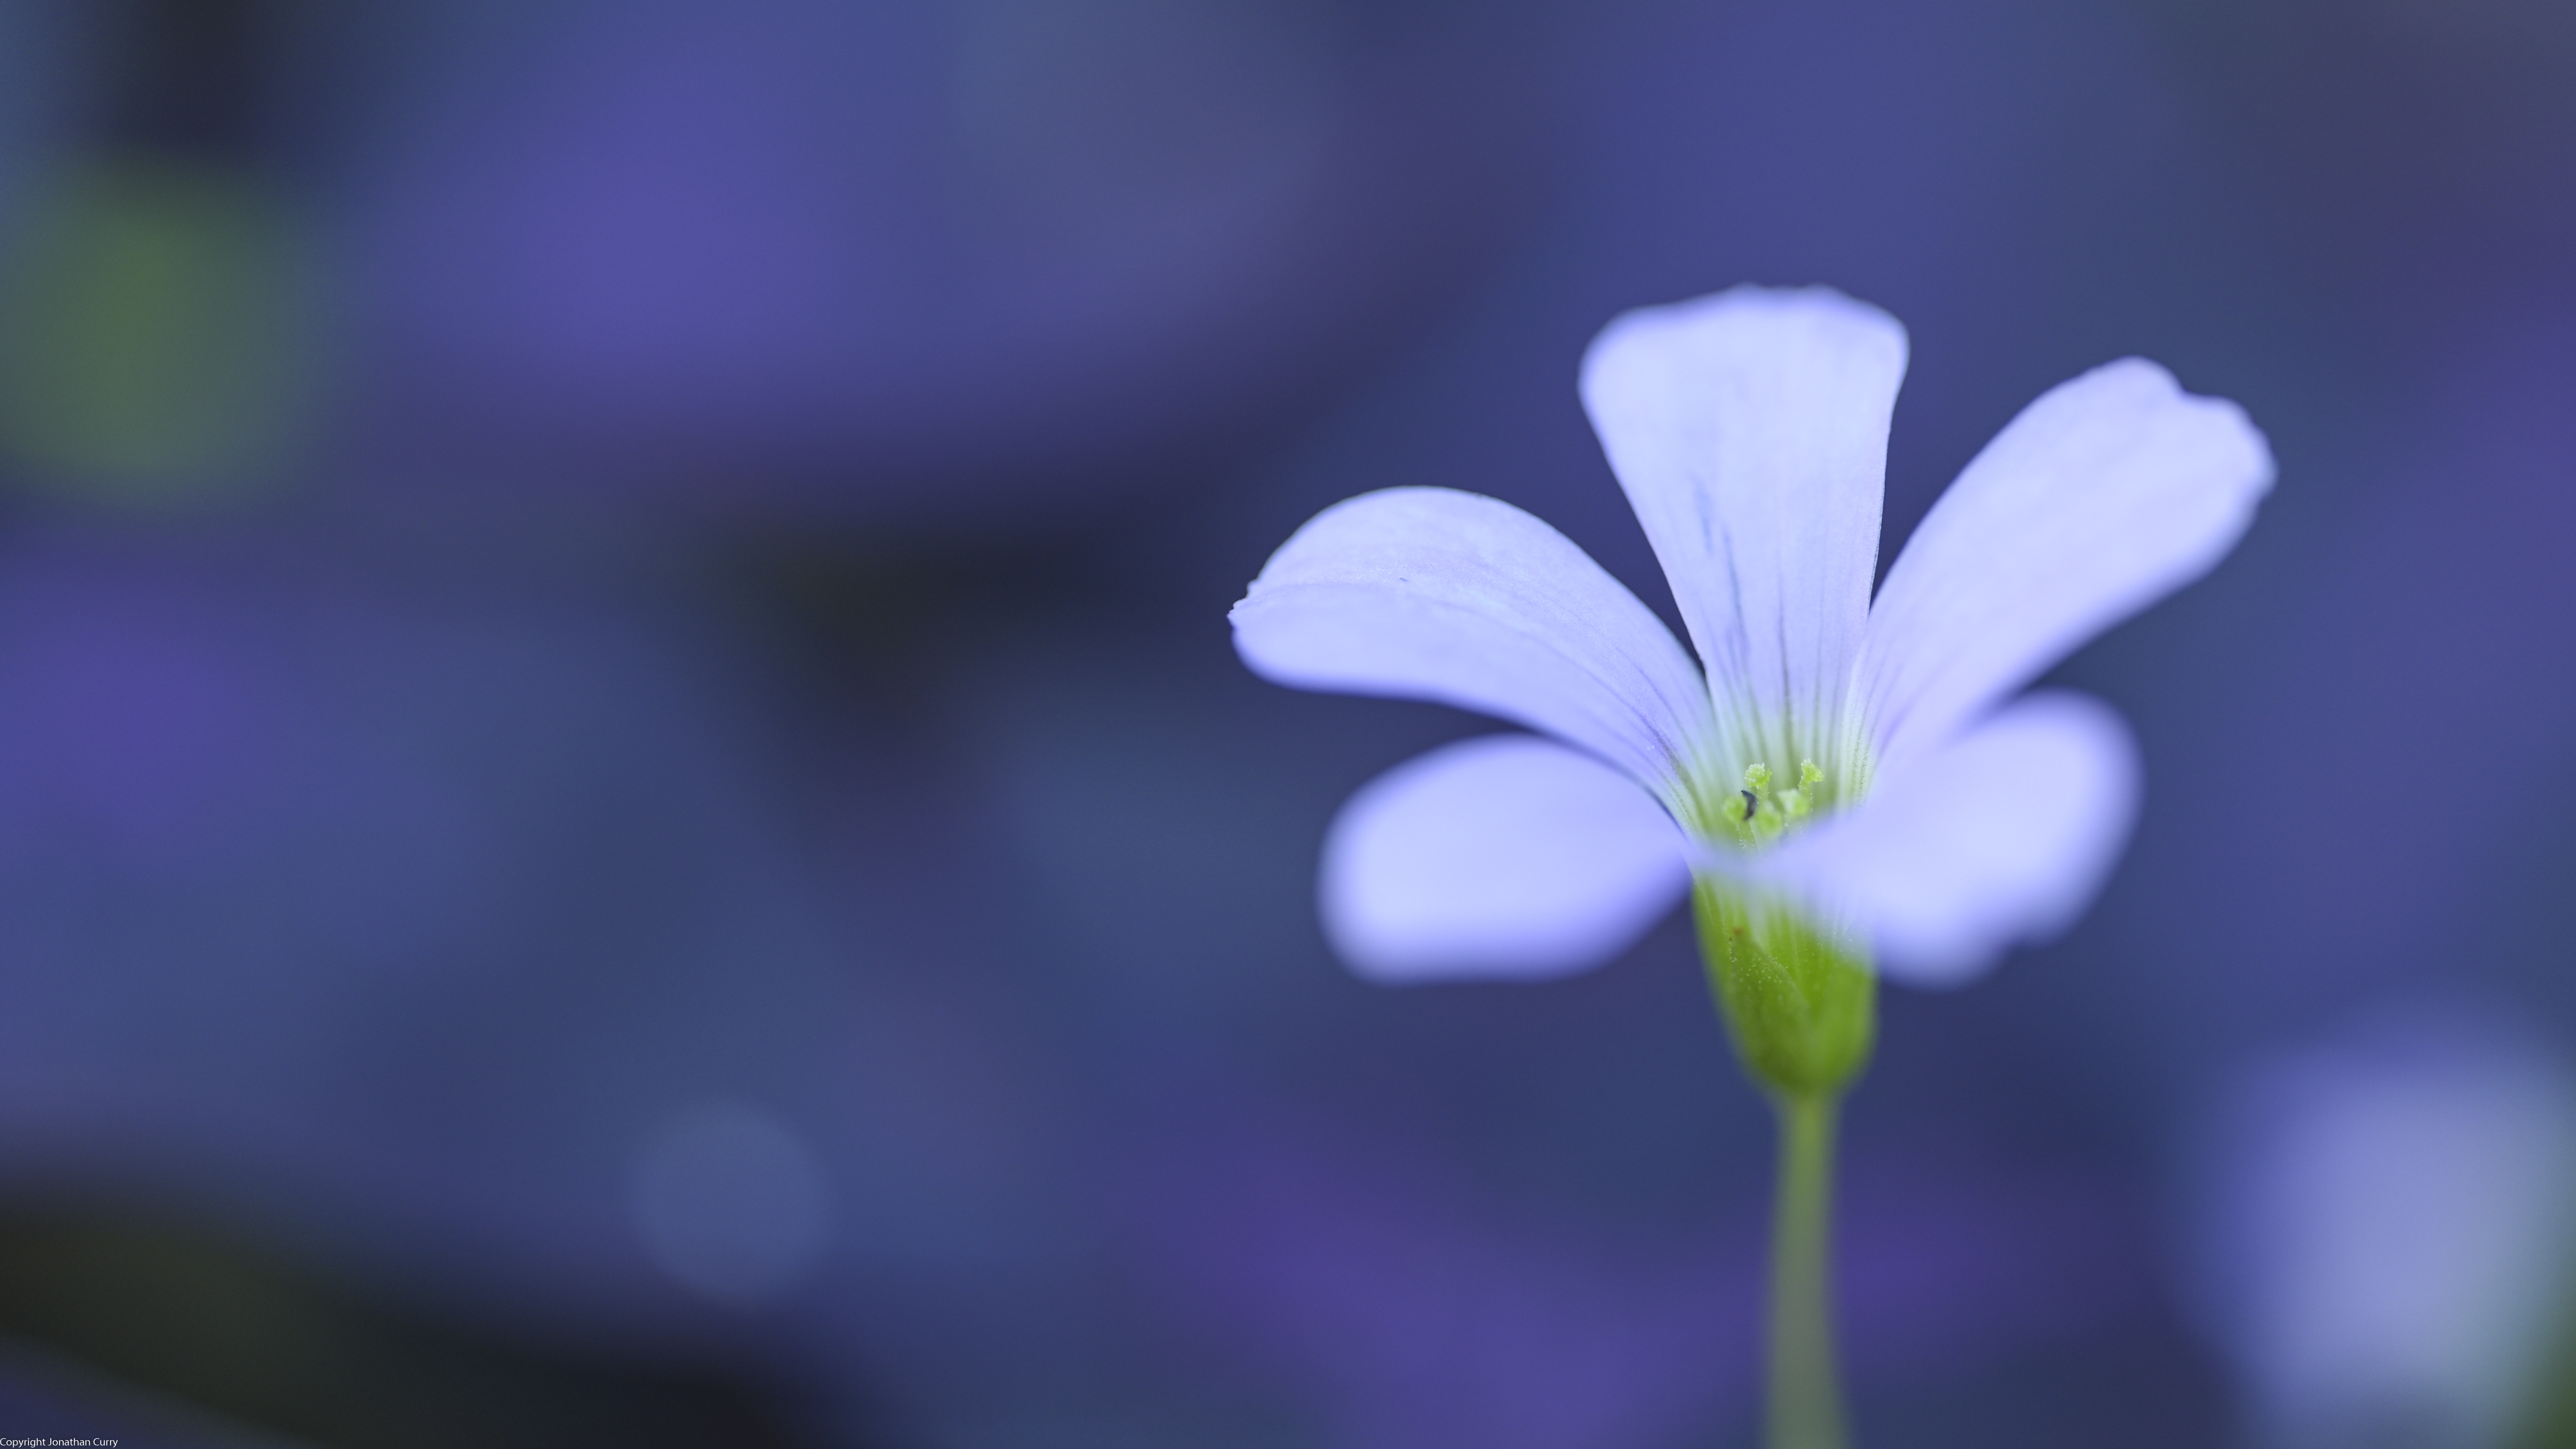 Flowers Plants Nature Macro Photography Outdoors Purple Background Petals Blurred Closeup Blurry Bac 3840x2160